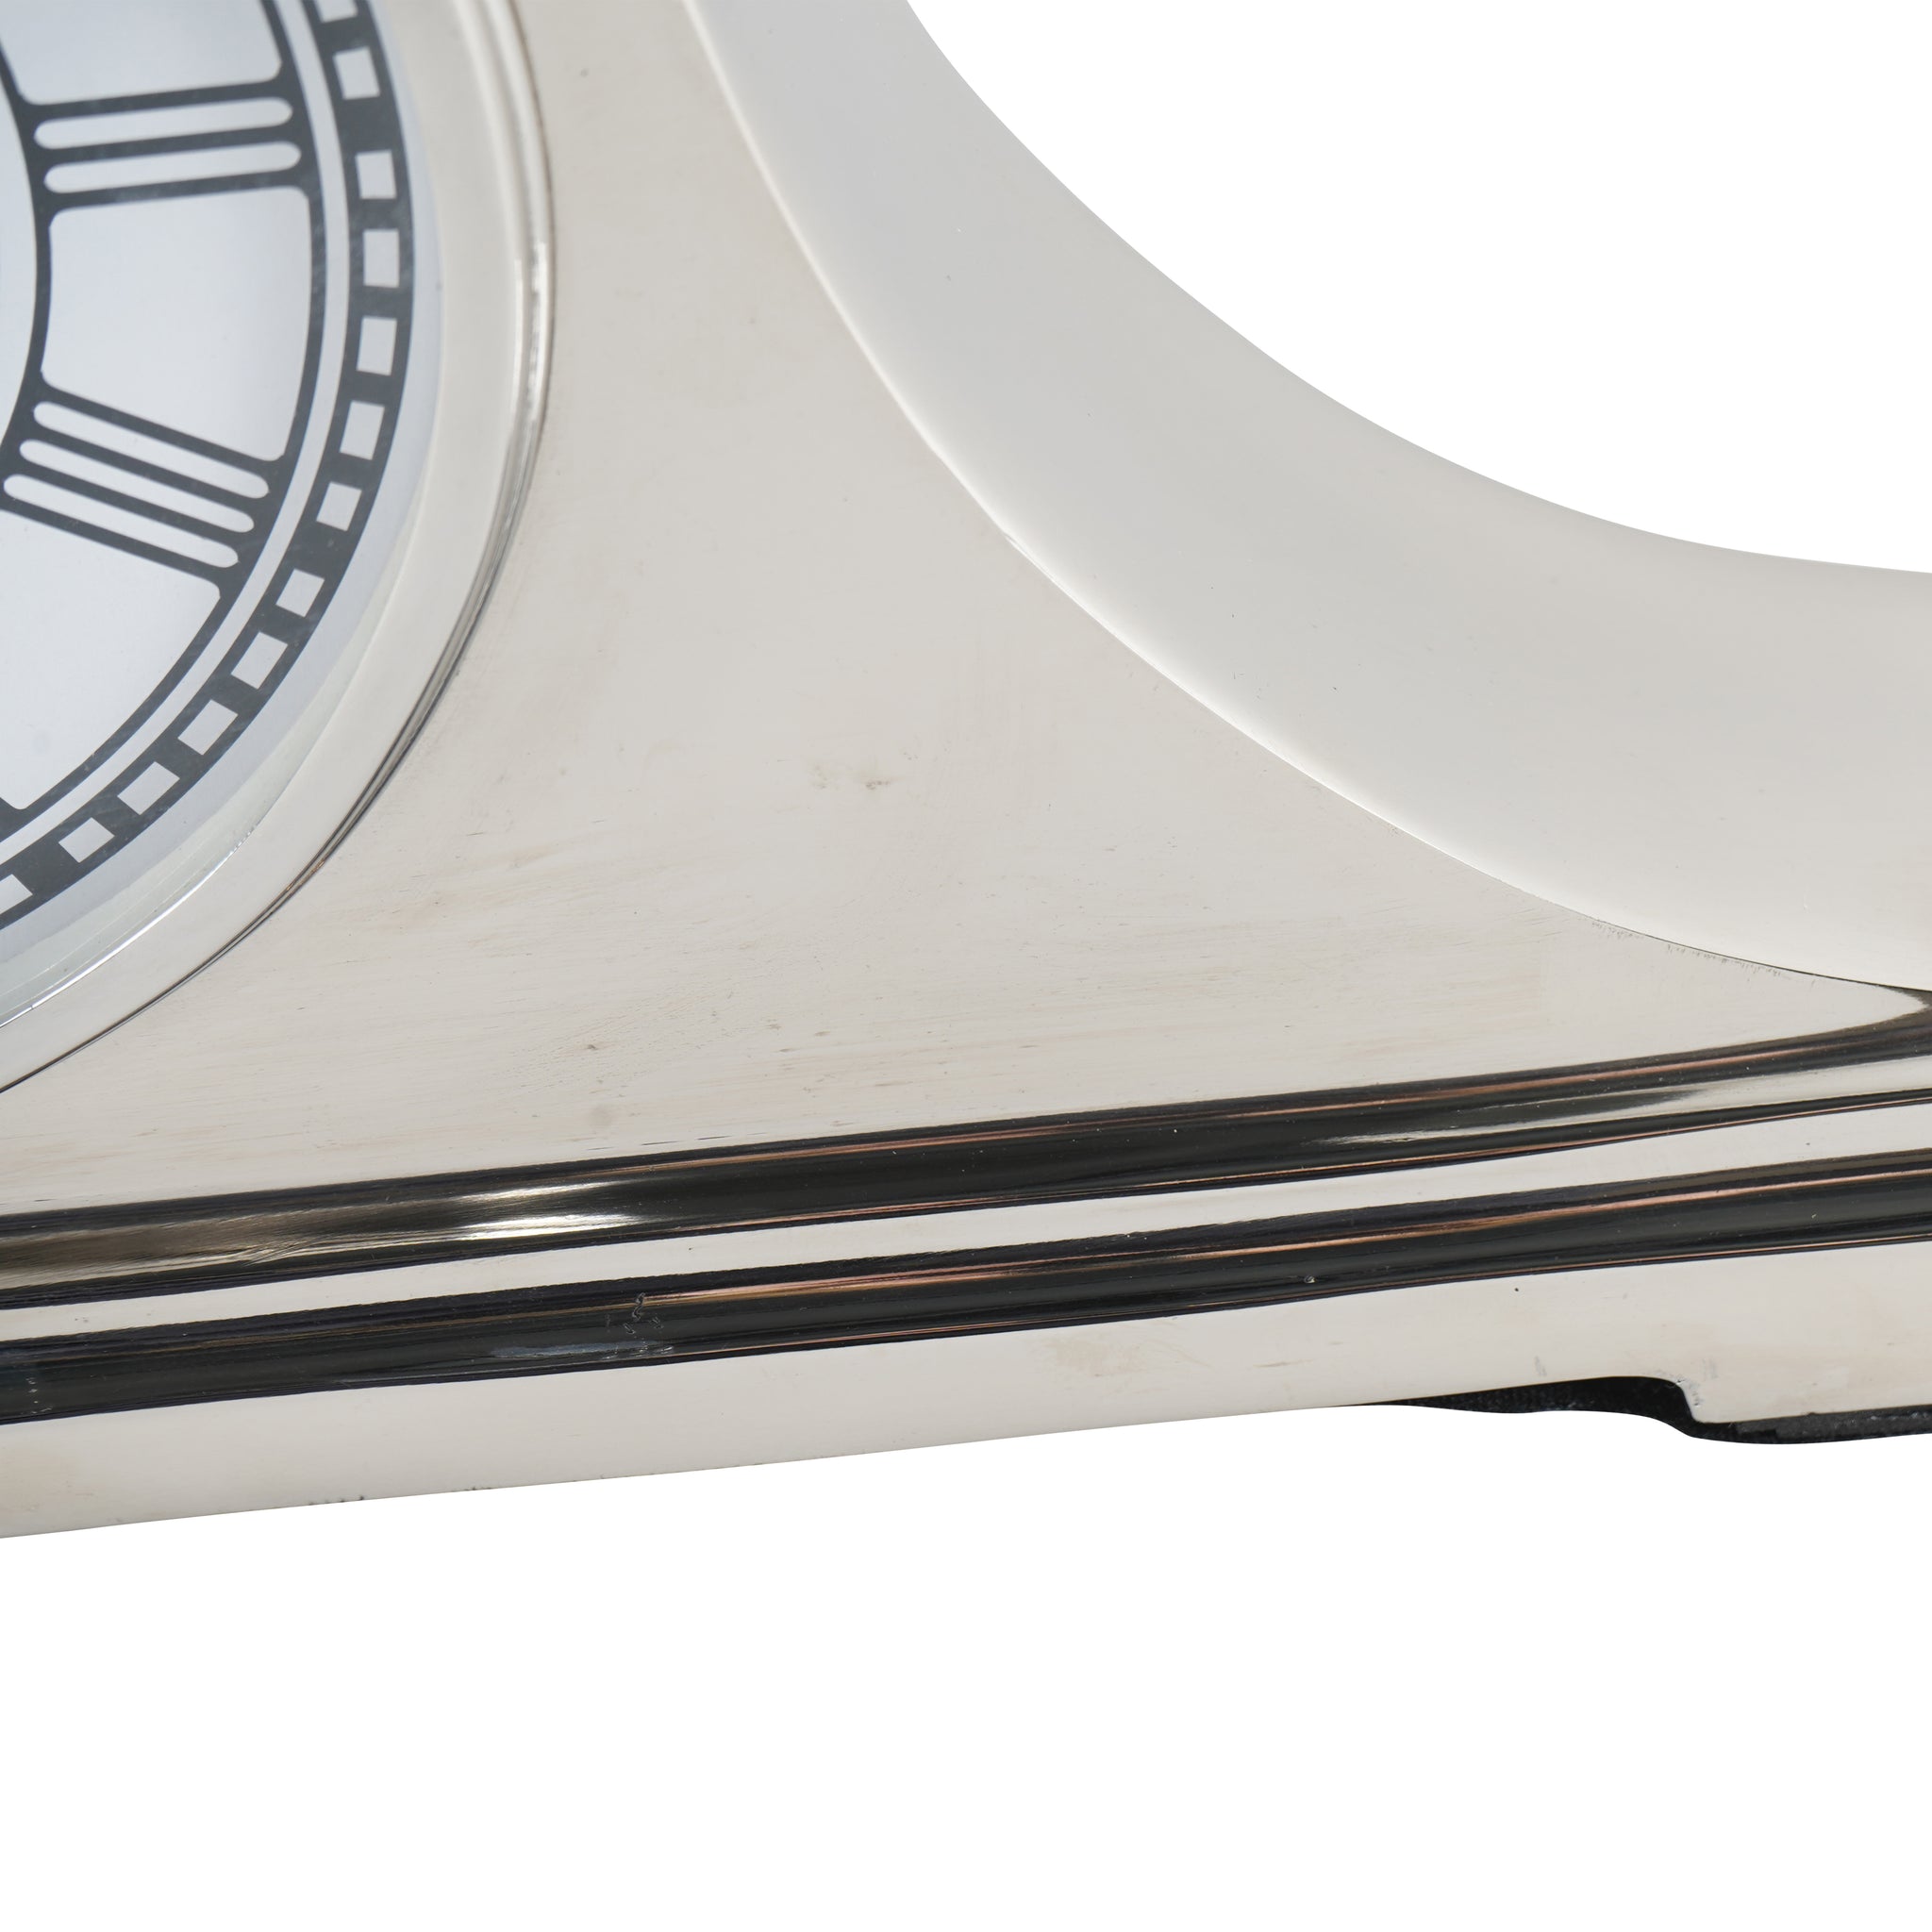 Period Style Carriage Mantel Clock in Nickel Finish